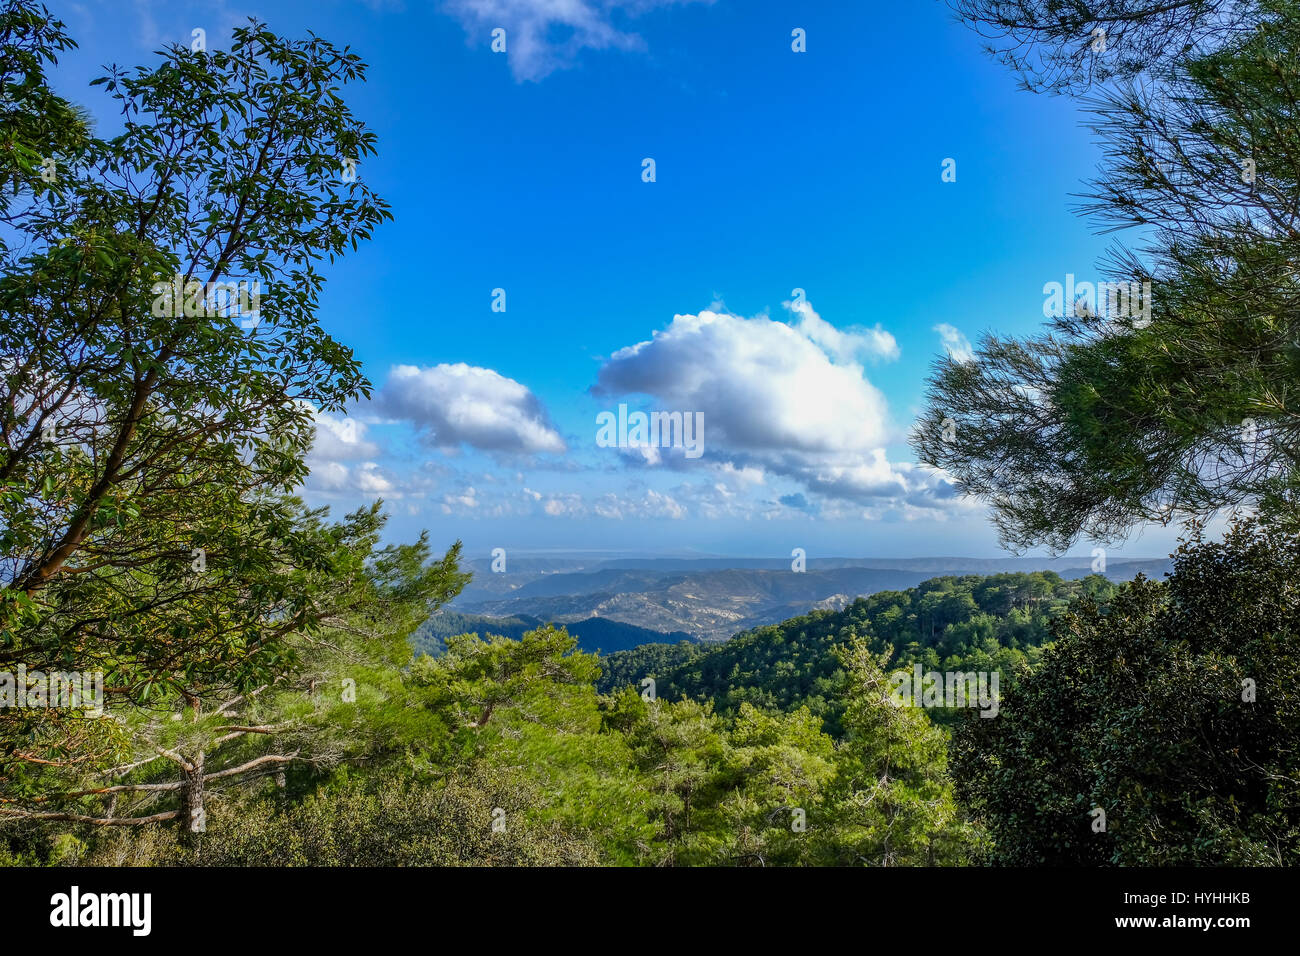 Troodos Mountain in Cyprus, a view from the top taken in springtime. Stock Photo